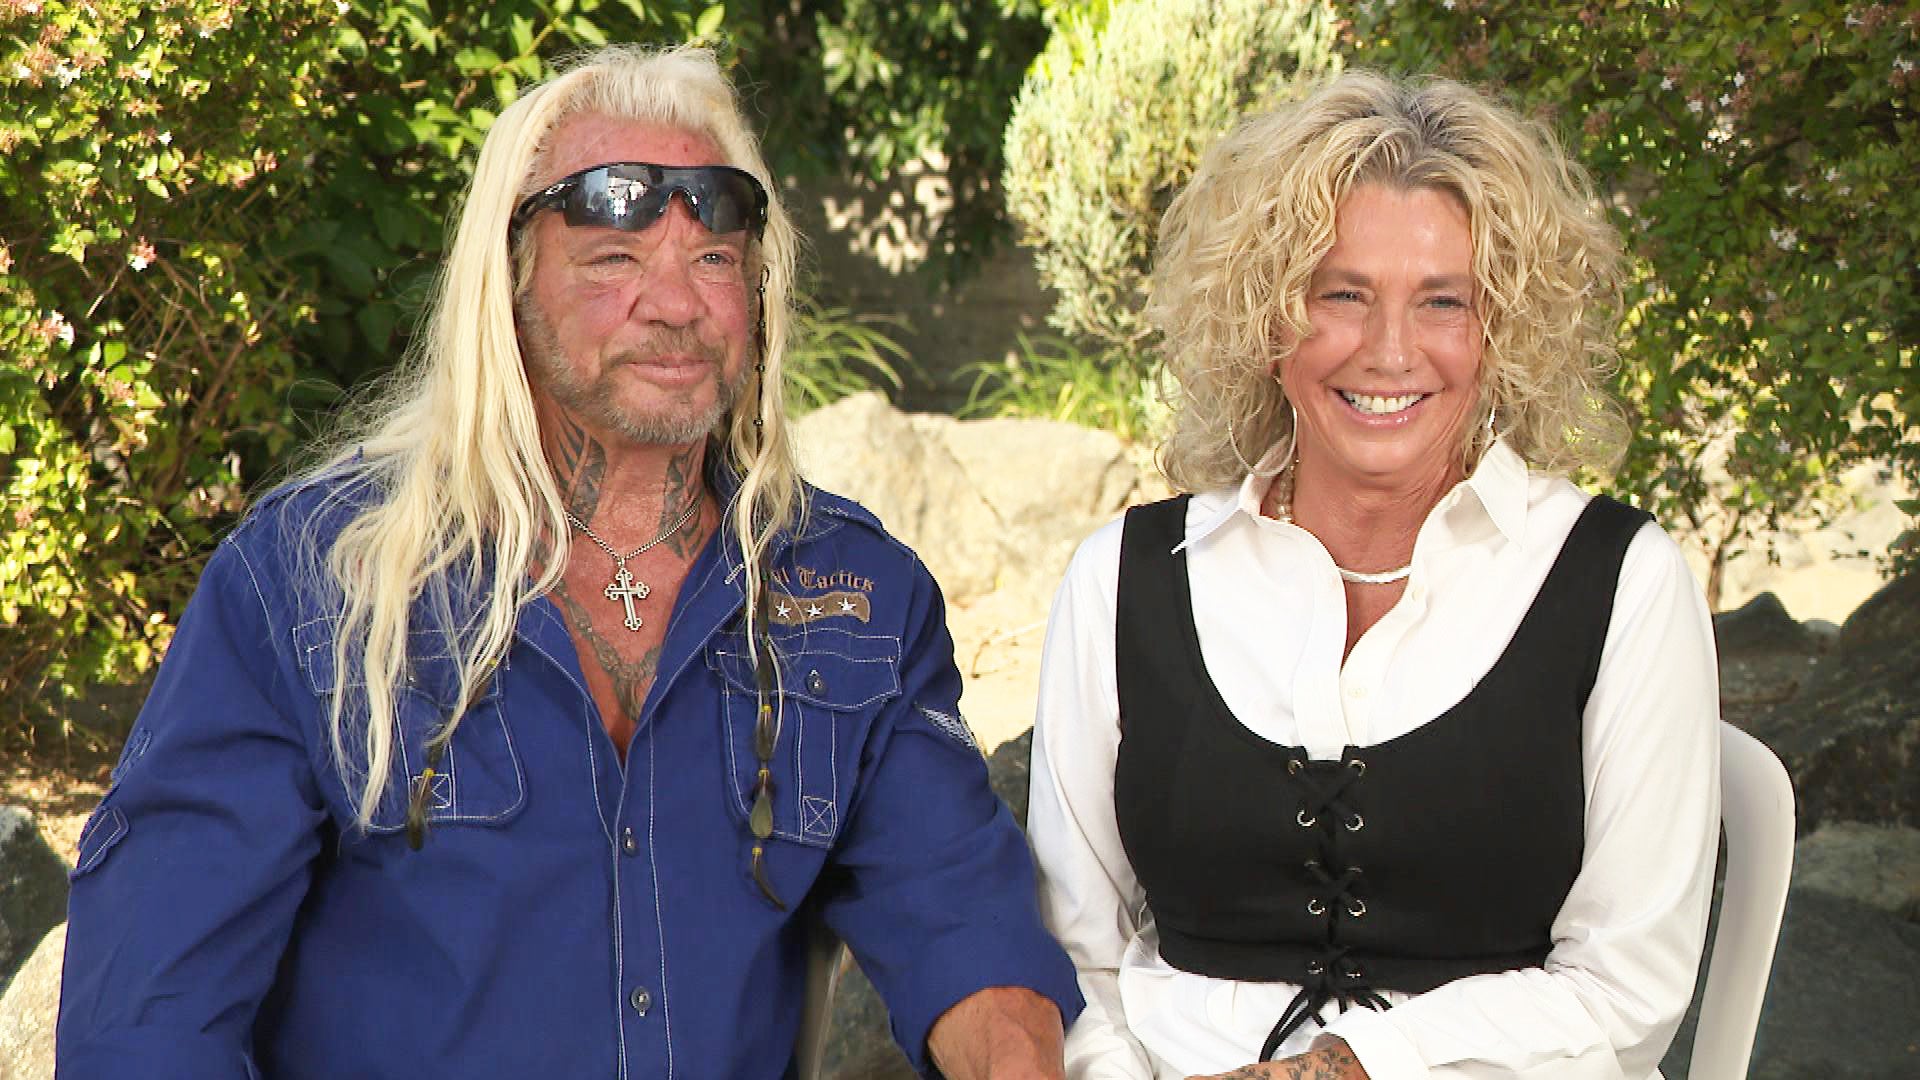 Dog The Bounty Hunter: What Happened To Duane Chapman After The Show